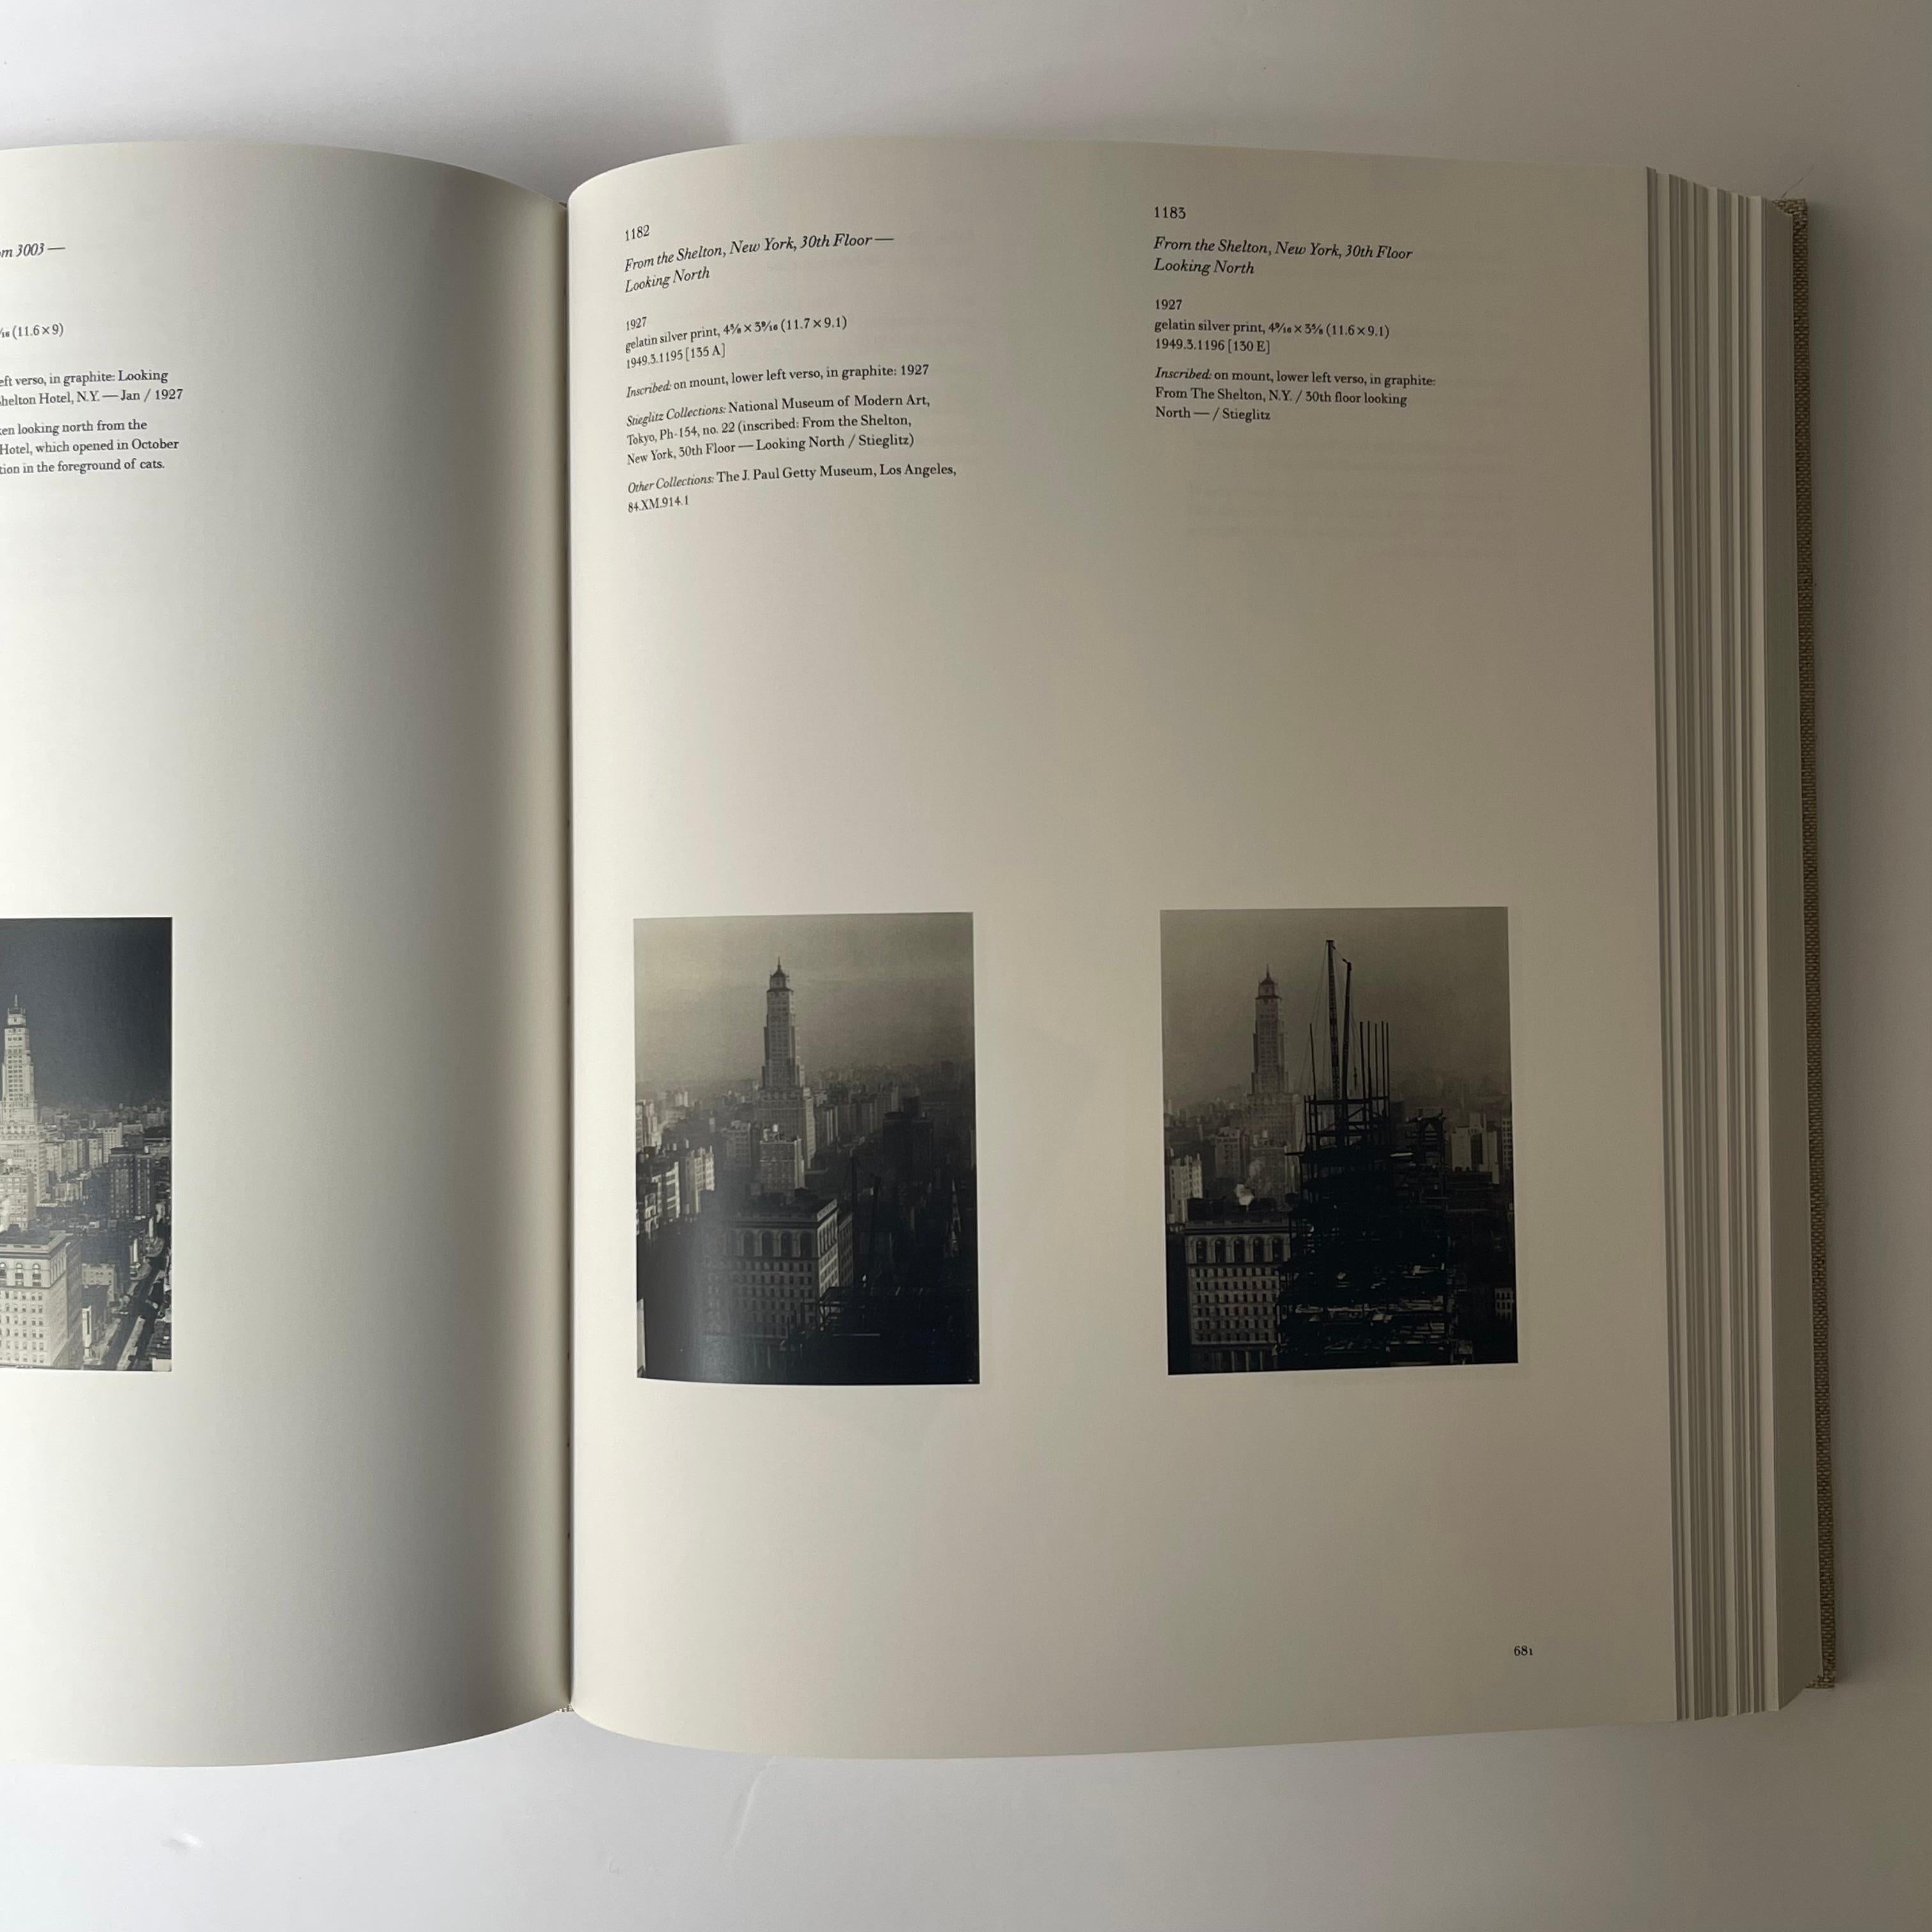 Alfred Stieglitz, The Key, Set Volume I & II 
Published by National Gallery of Art/Harry N. Abrams, New York, 2002

Few individuals have exerted as profound an influence on 20th-century American art and culture as Alfred Stieglitz (1846-1964). This